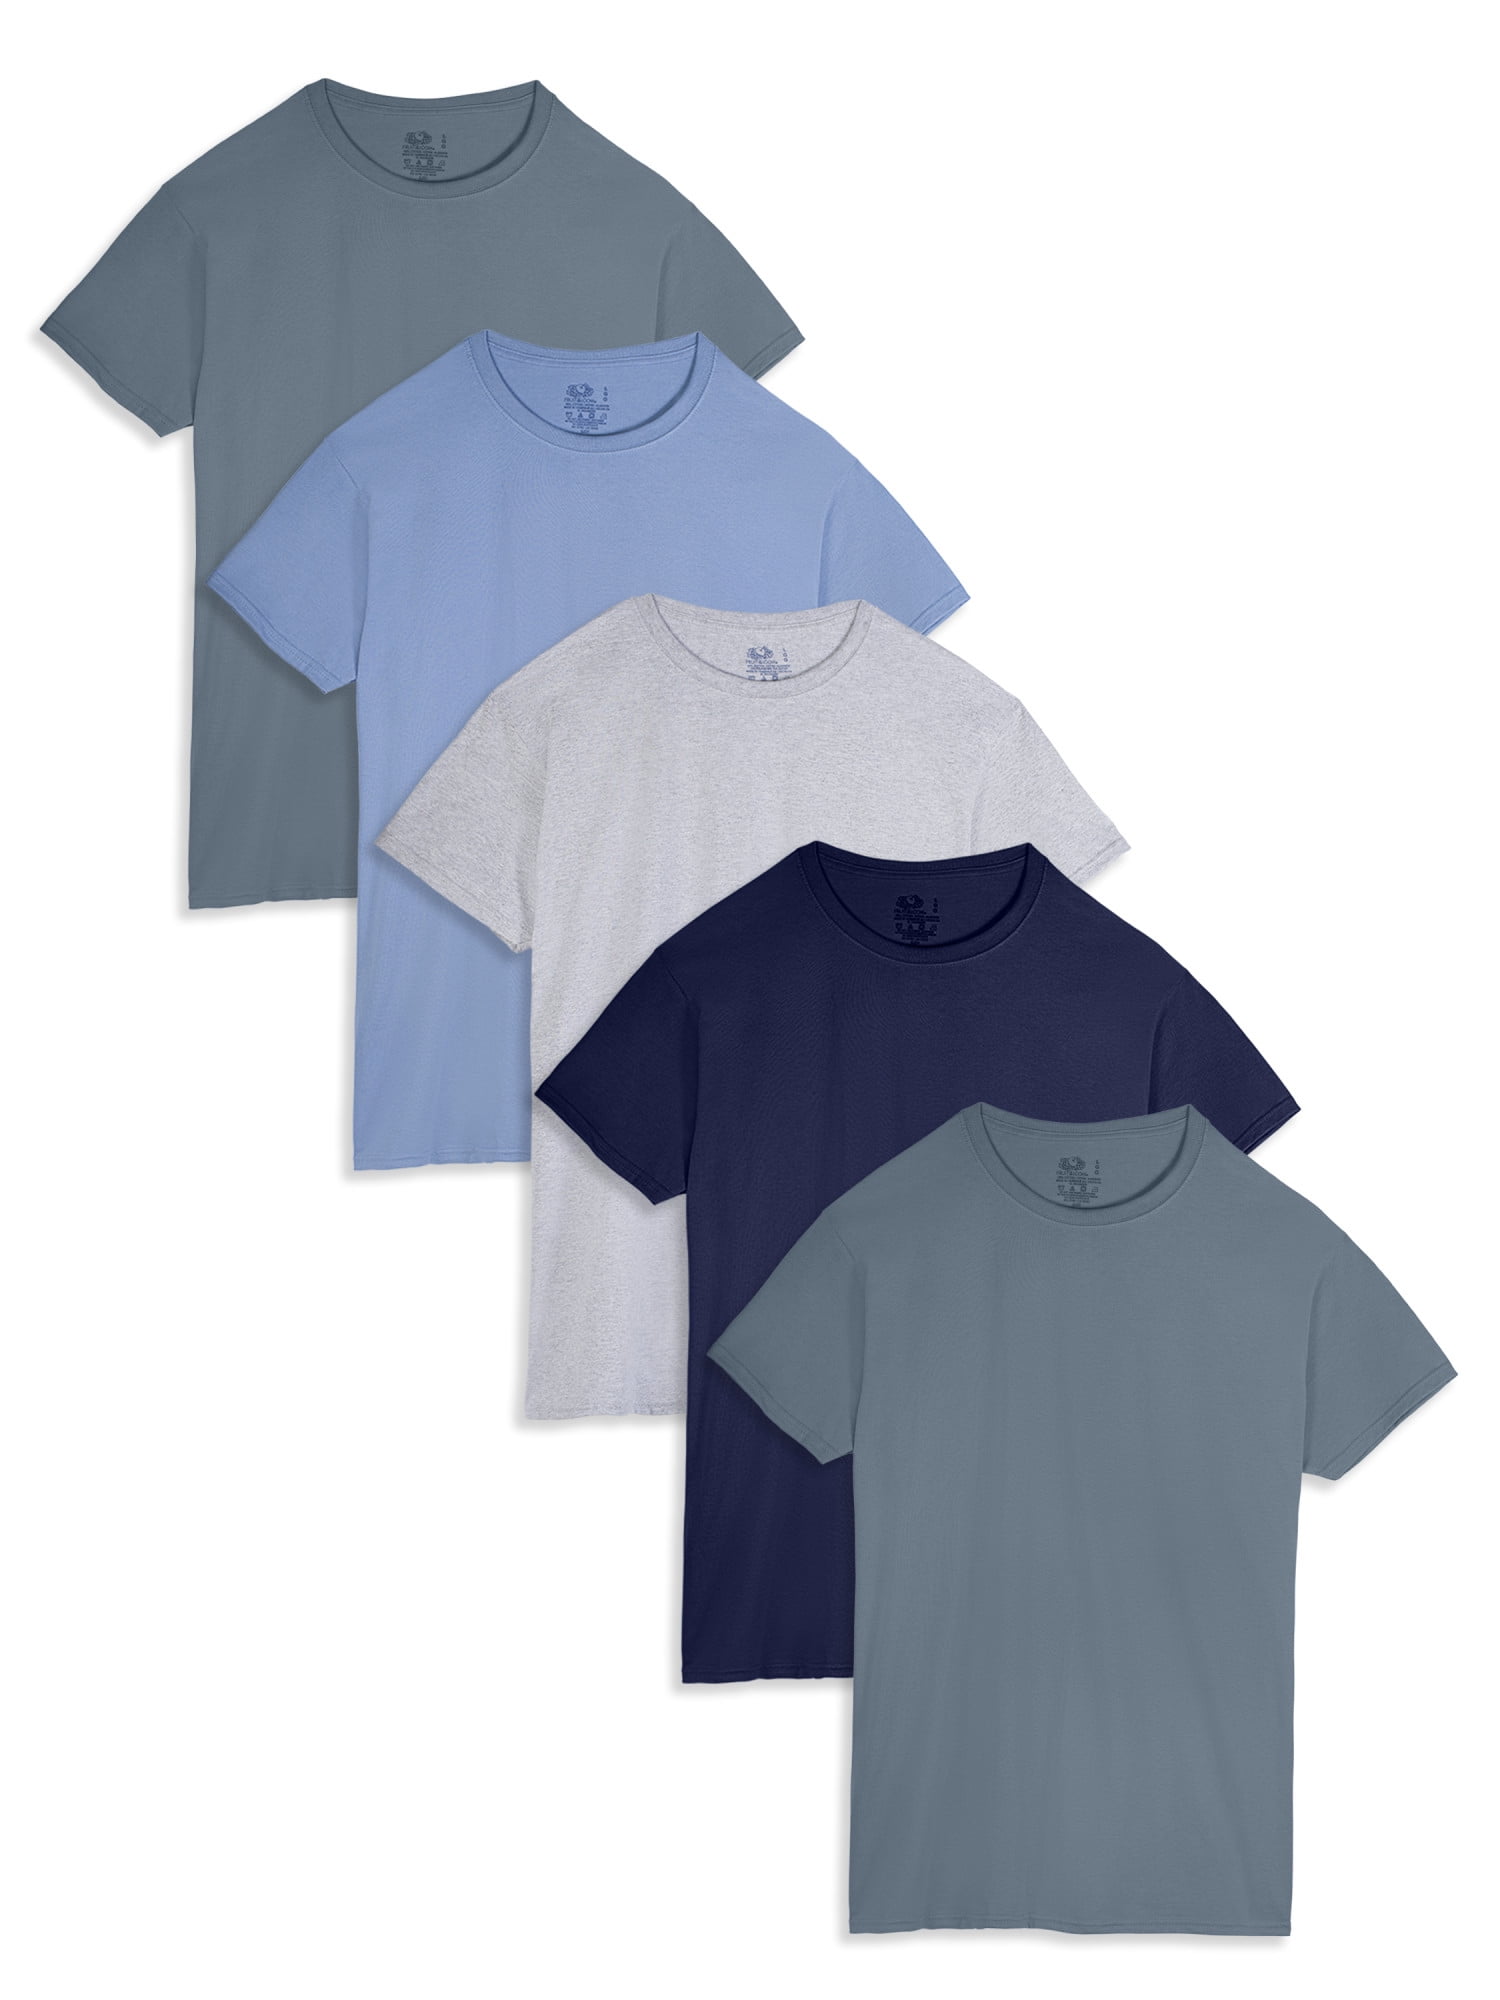 2 Pack Fruit of the Loom Mens Crew T-Shirt 